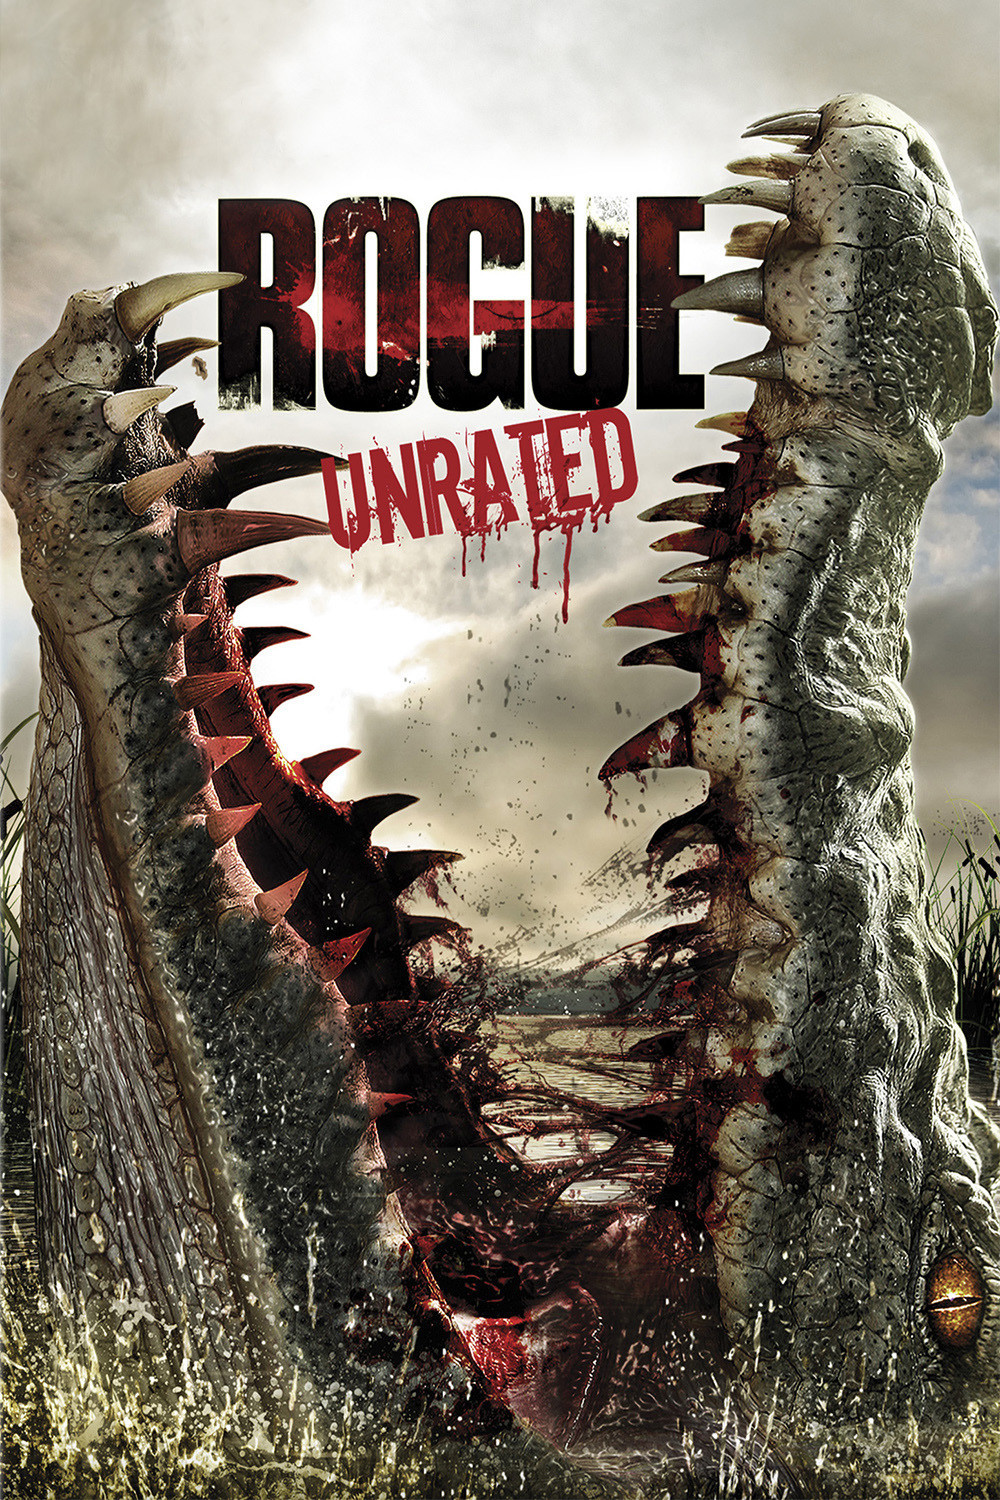 Rogue-2007-Hindi-Dubbed-Movie-Watch-Online